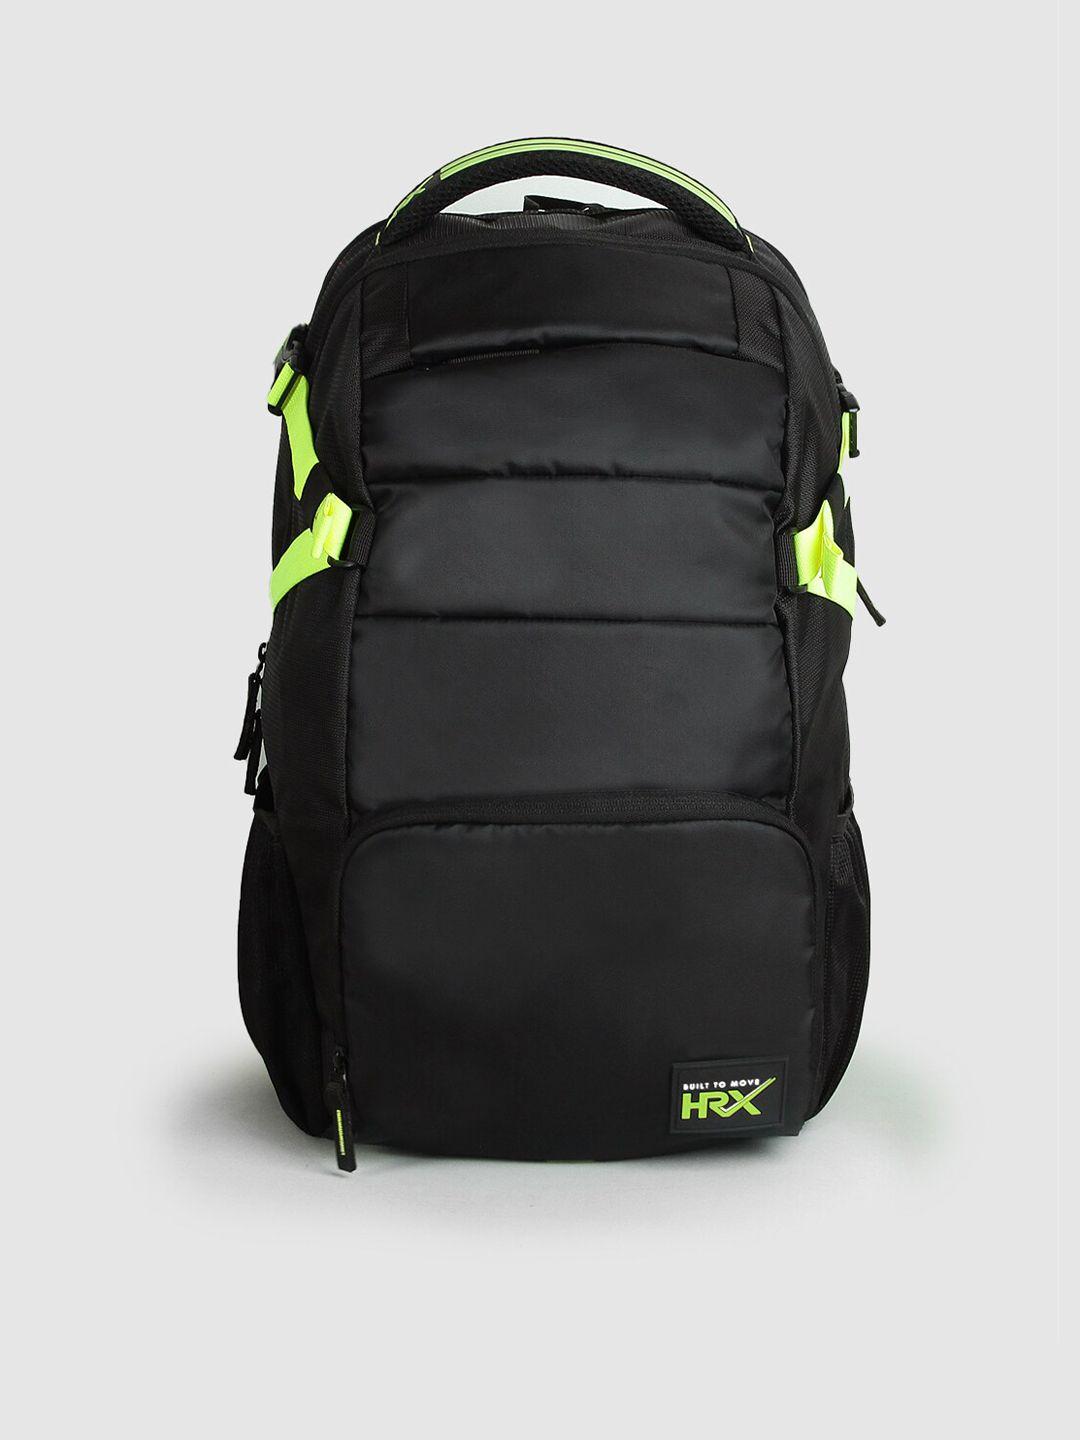 hrx by hrithik roshan backpack with compression straps